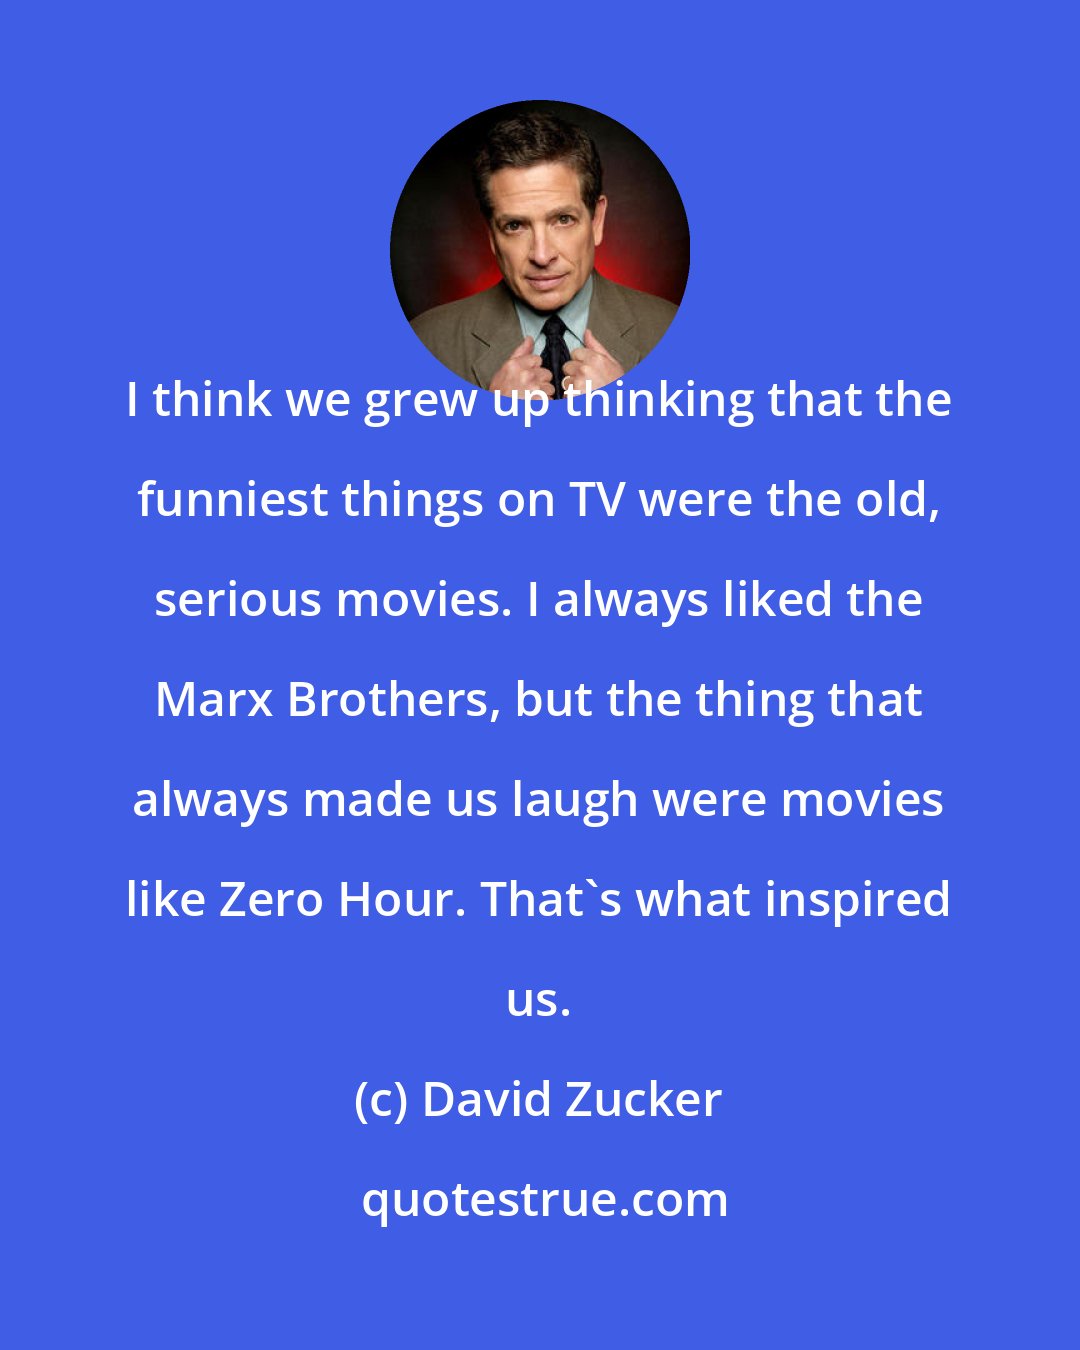 David Zucker: I think we grew up thinking that the funniest things on TV were the old, serious movies. I always liked the Marx Brothers, but the thing that always made us laugh were movies like Zero Hour. That's what inspired us.